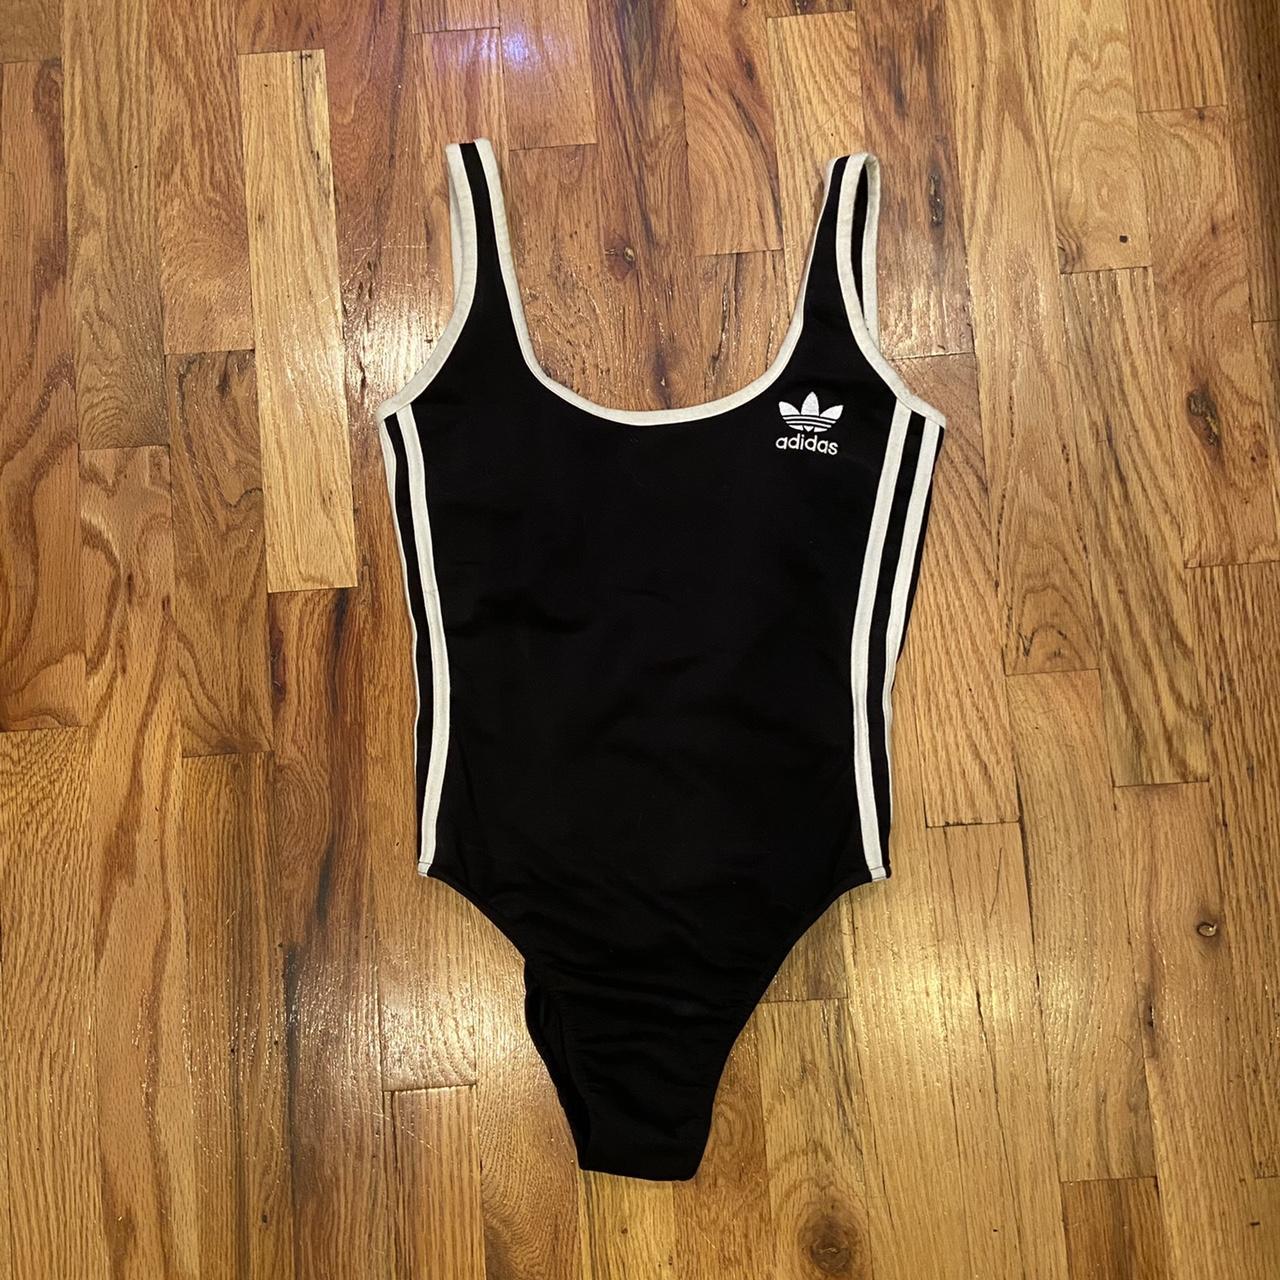 Adidas Women's Black and White Swimsuit-one-piece | Depop